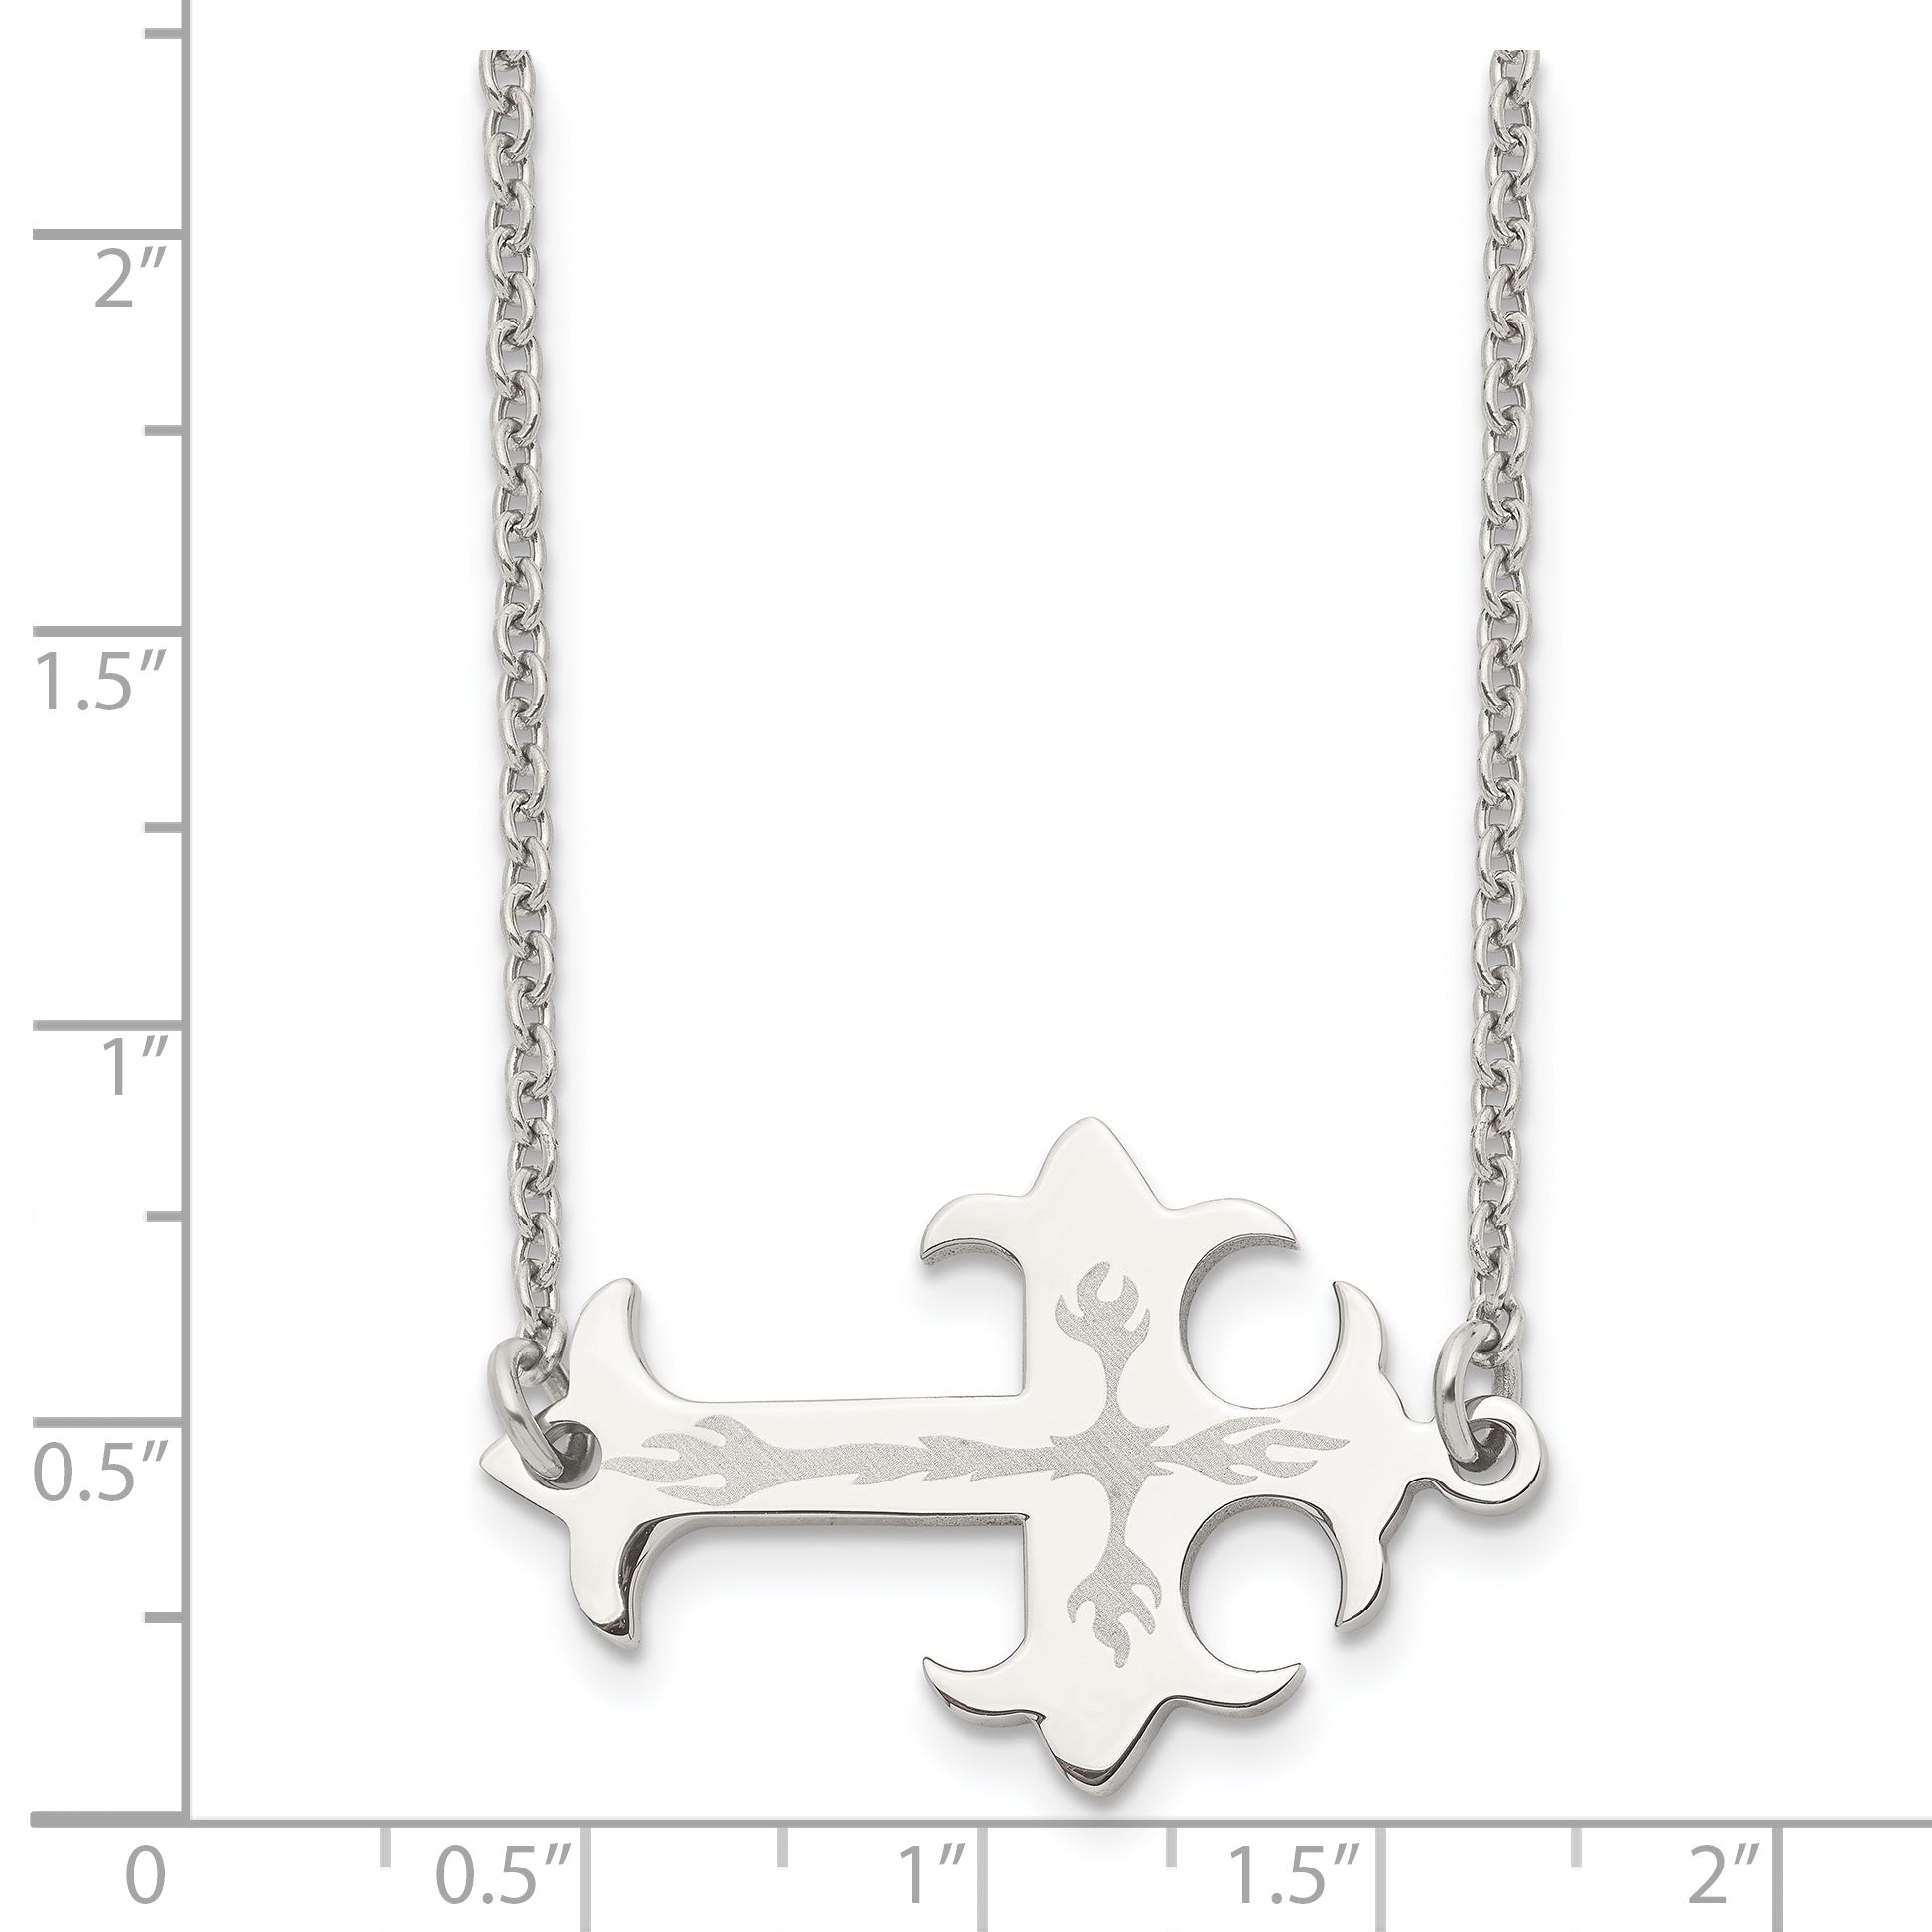 Chisel Stainless Steel Brushed and Polished Flame Design Sideways Cross on a 21 inch Cable Chain Necklace